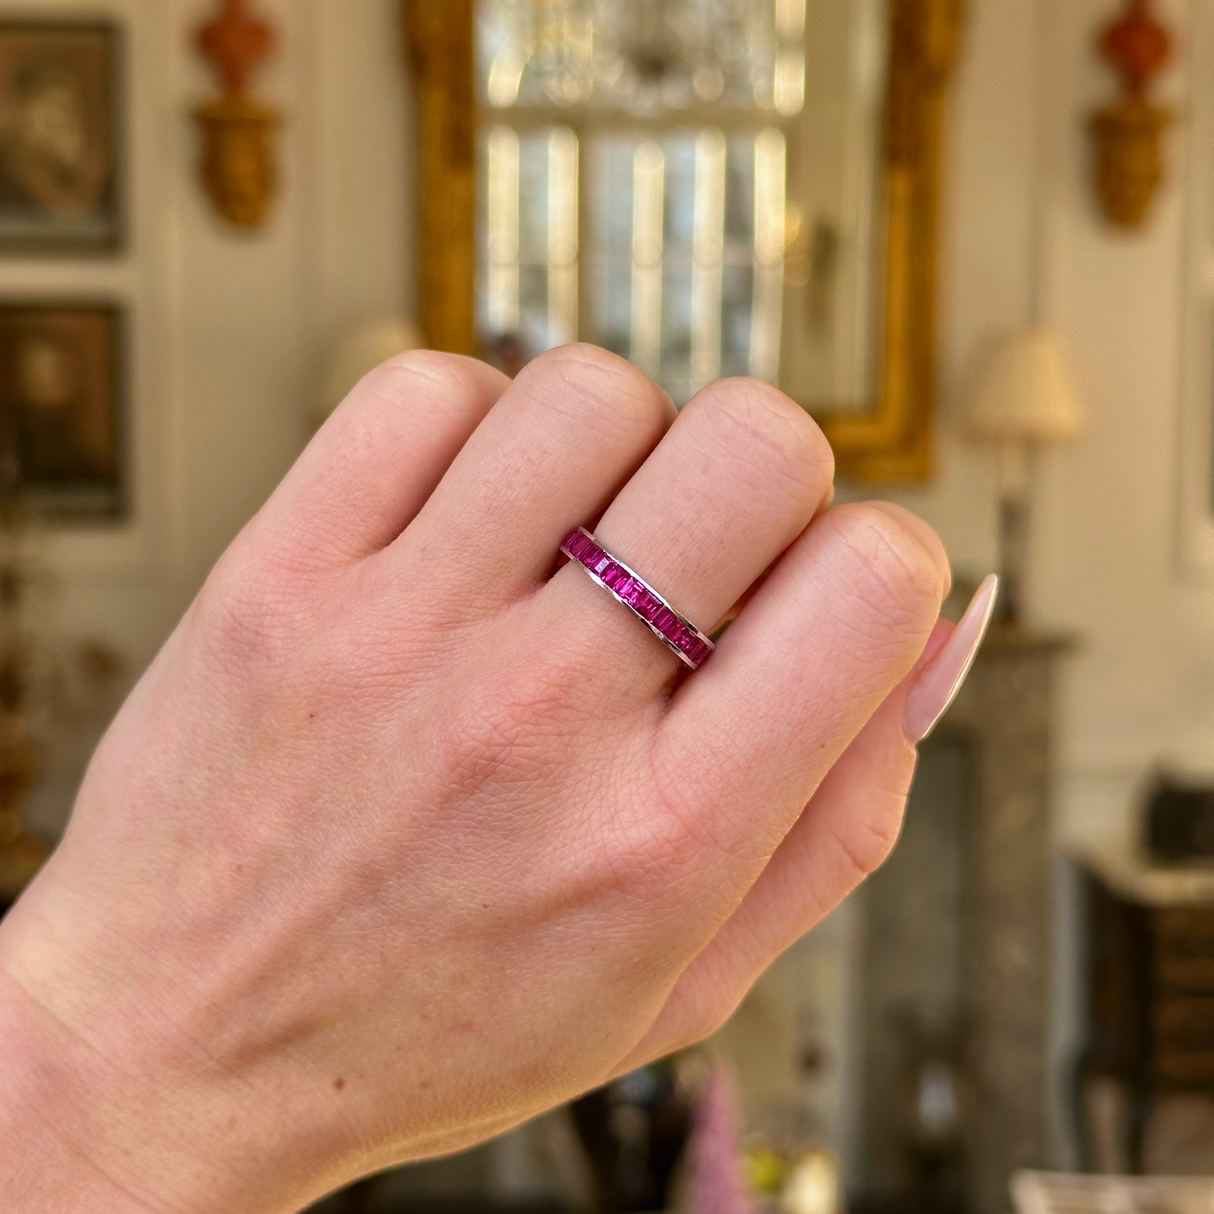 Vintage ruby eternity ring worn on closed hand.